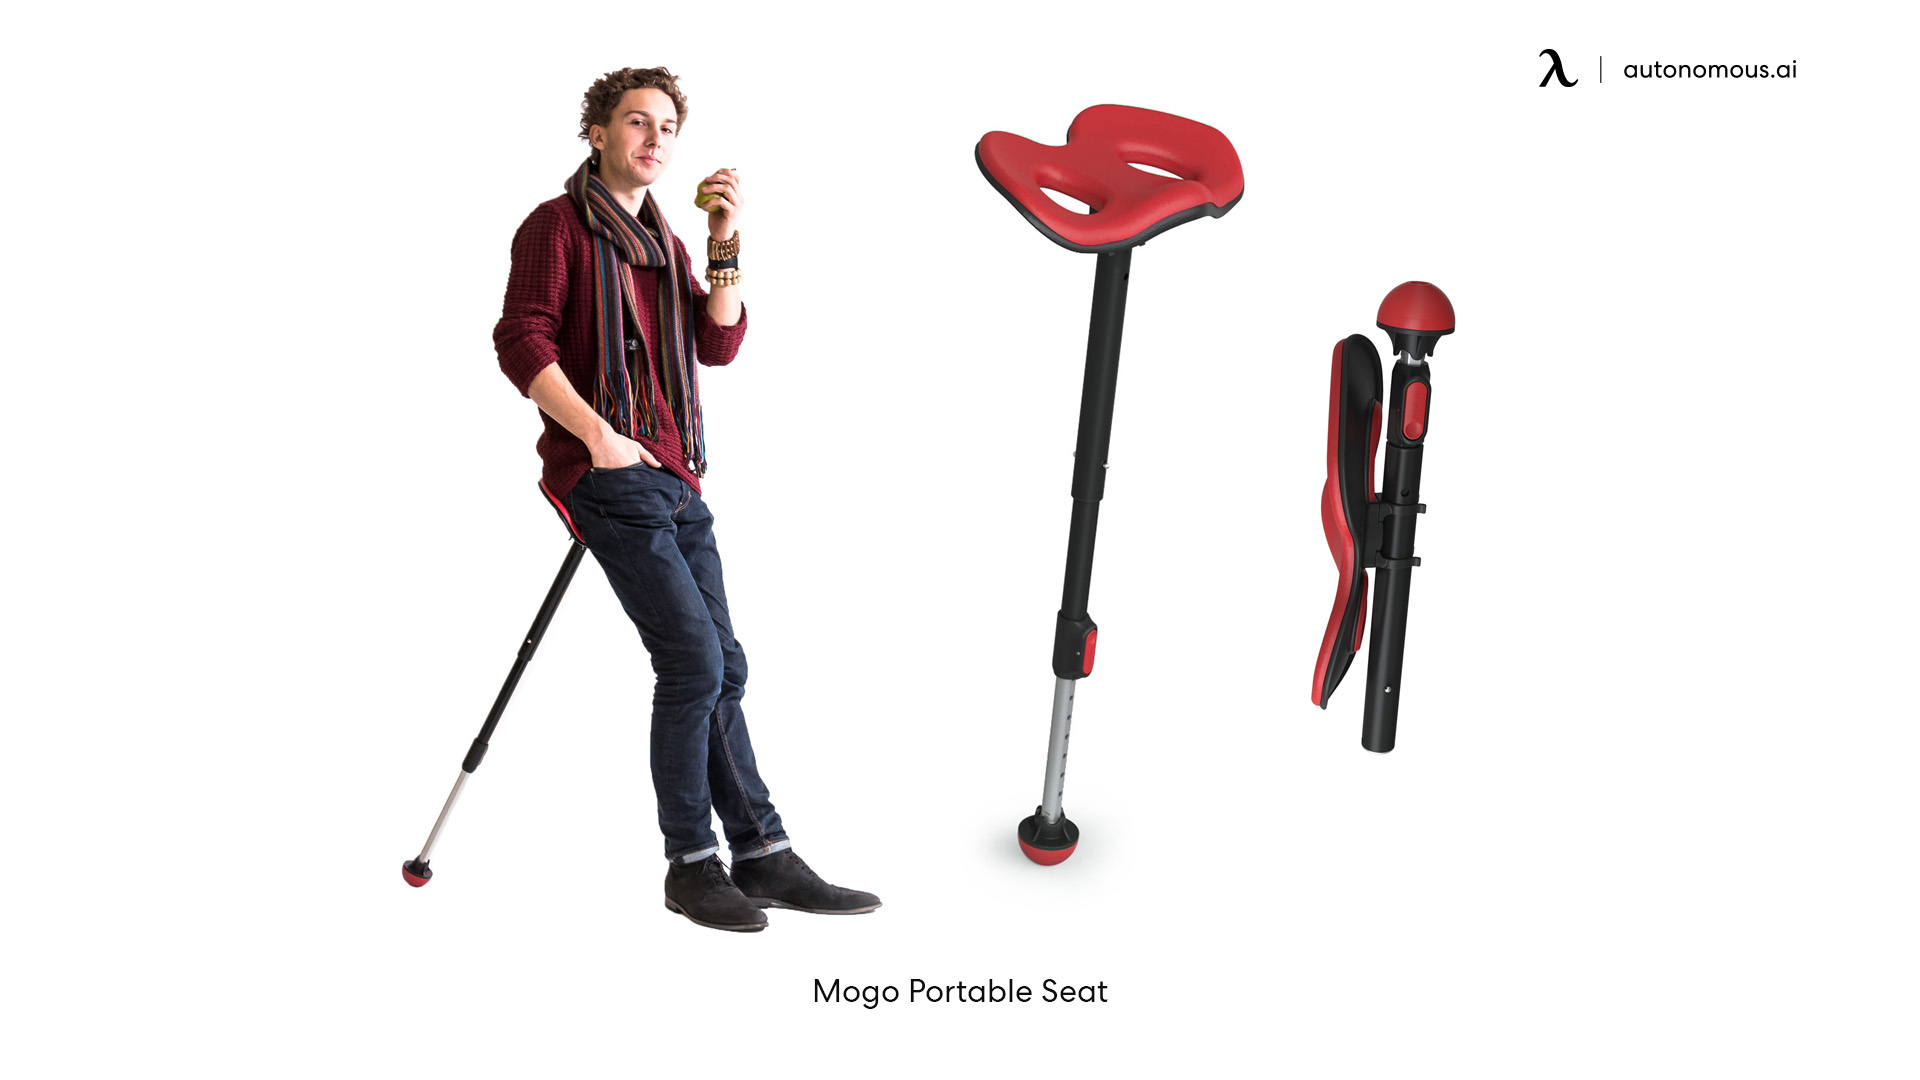 Mogo Portable Seat active sitting chairs